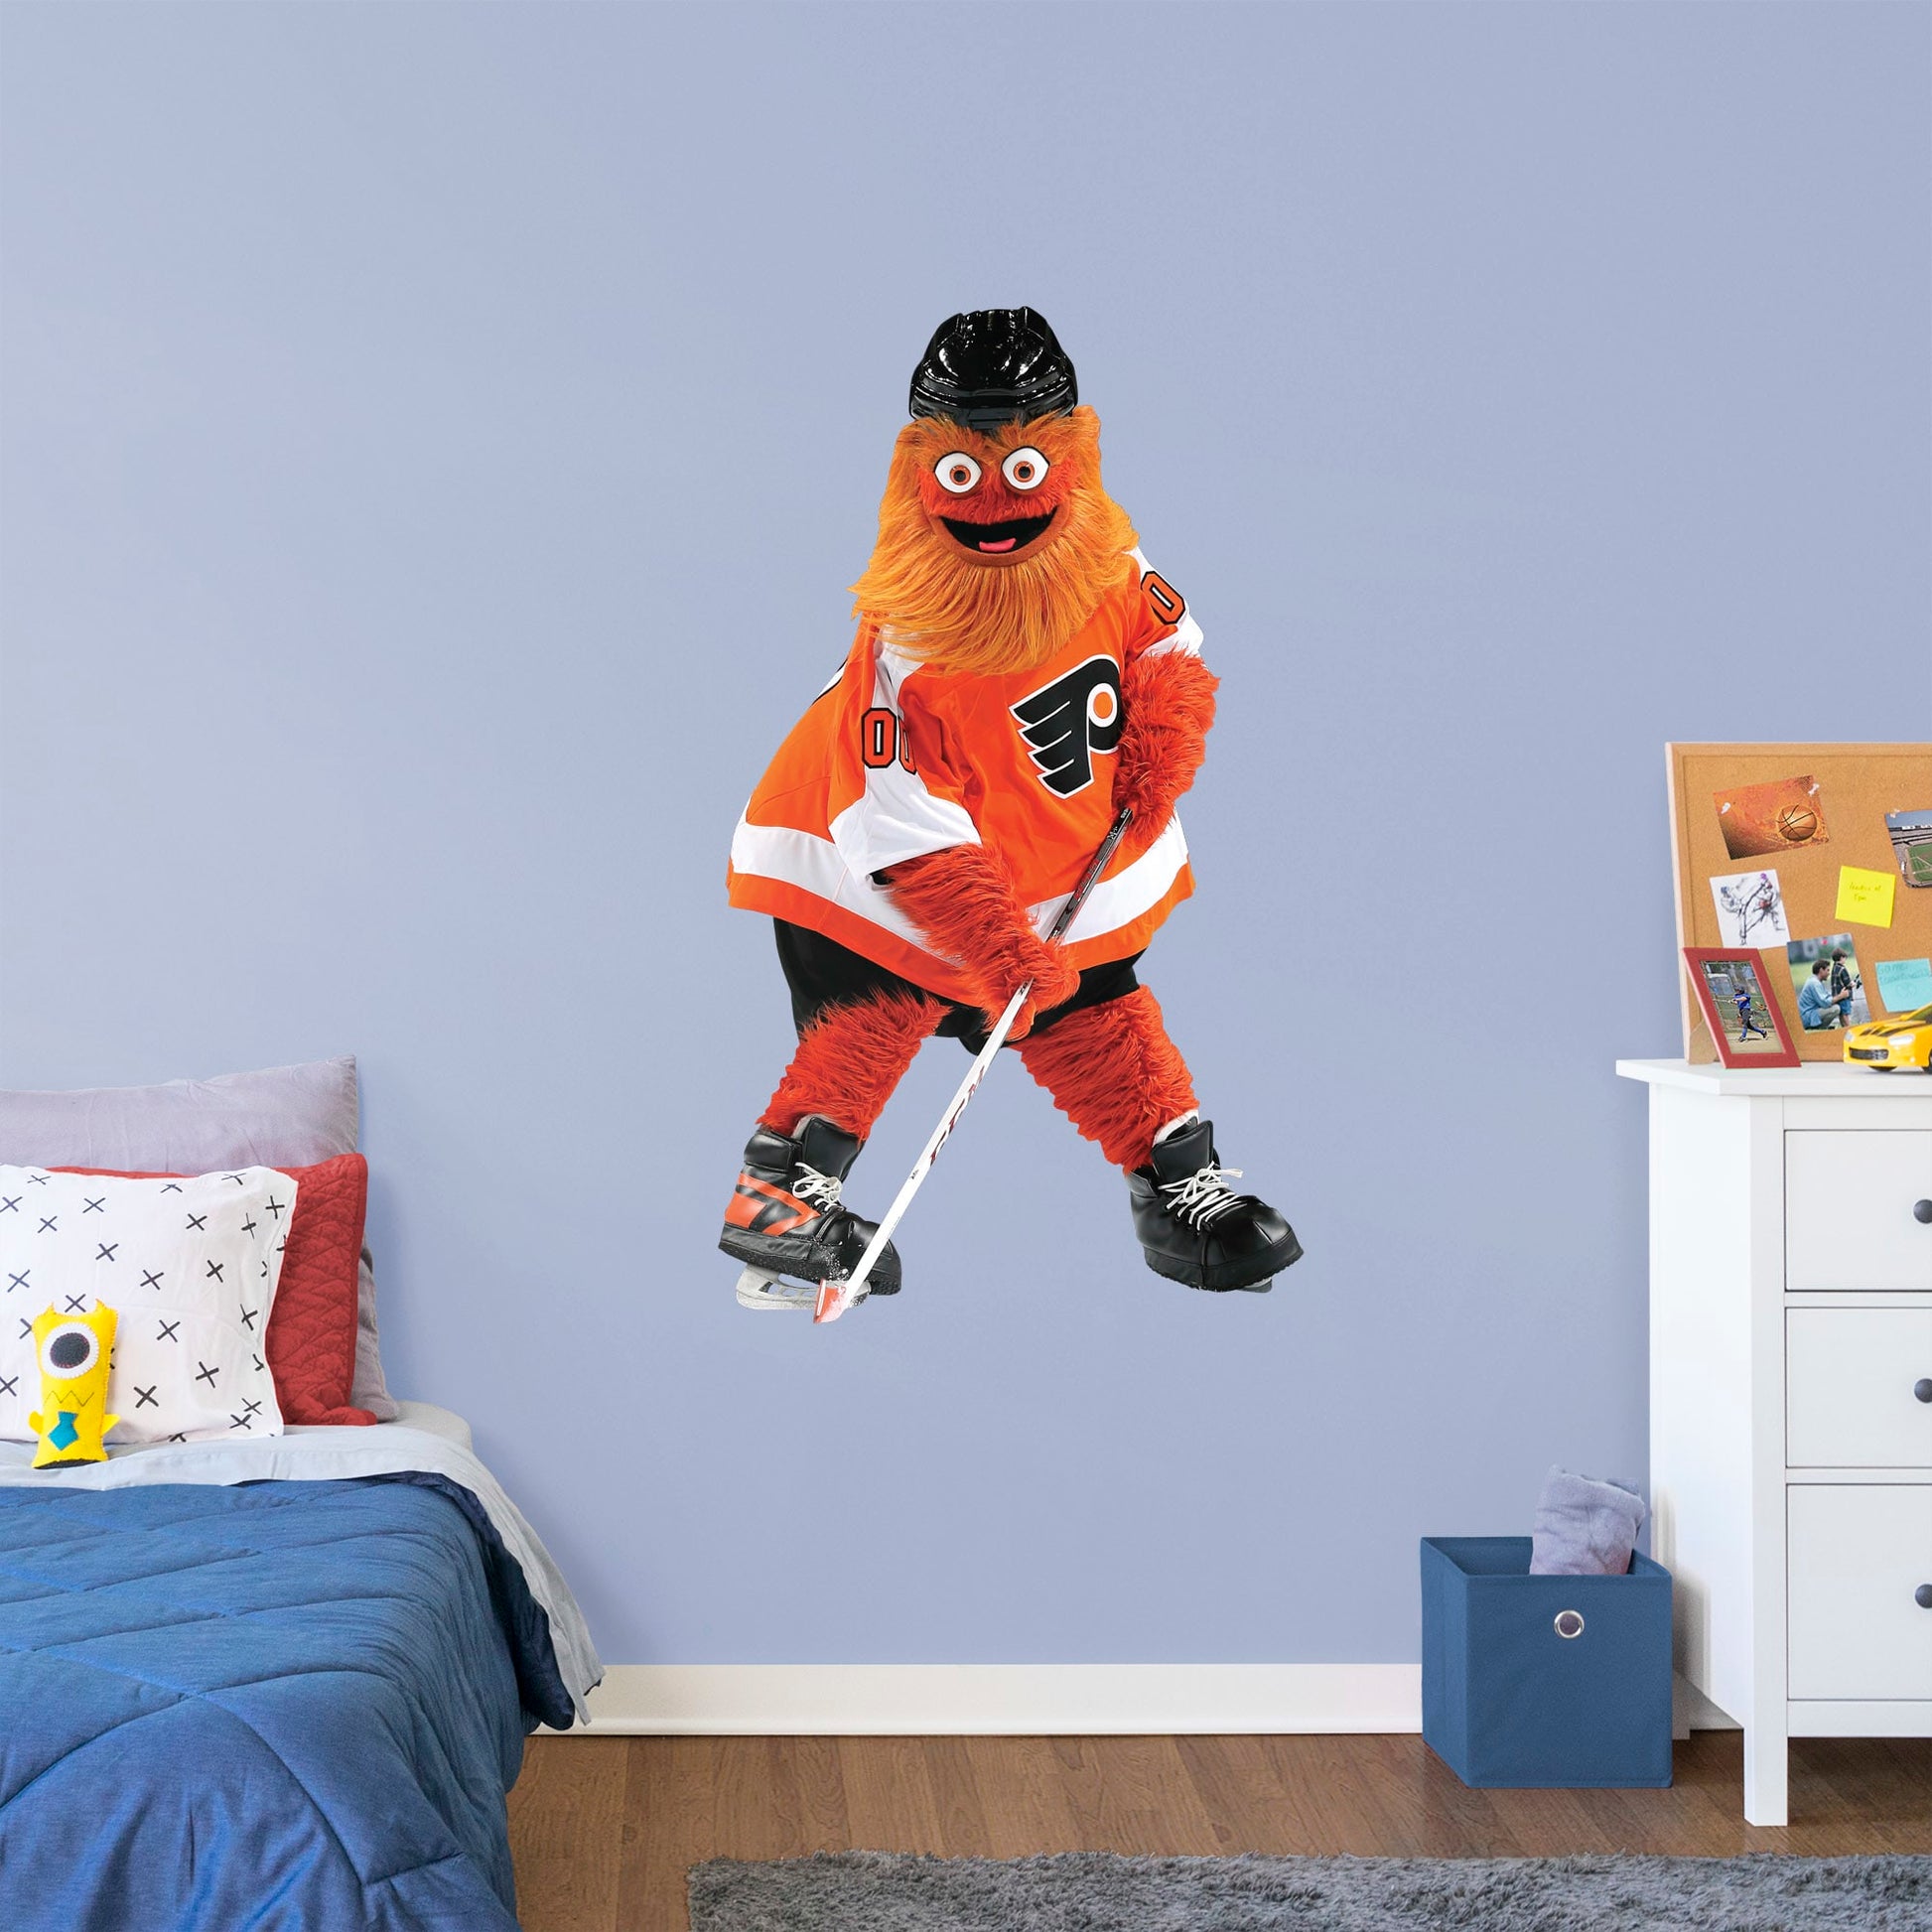 Flyers' Gritty gets a Philadelphia-style welcome filled with insults